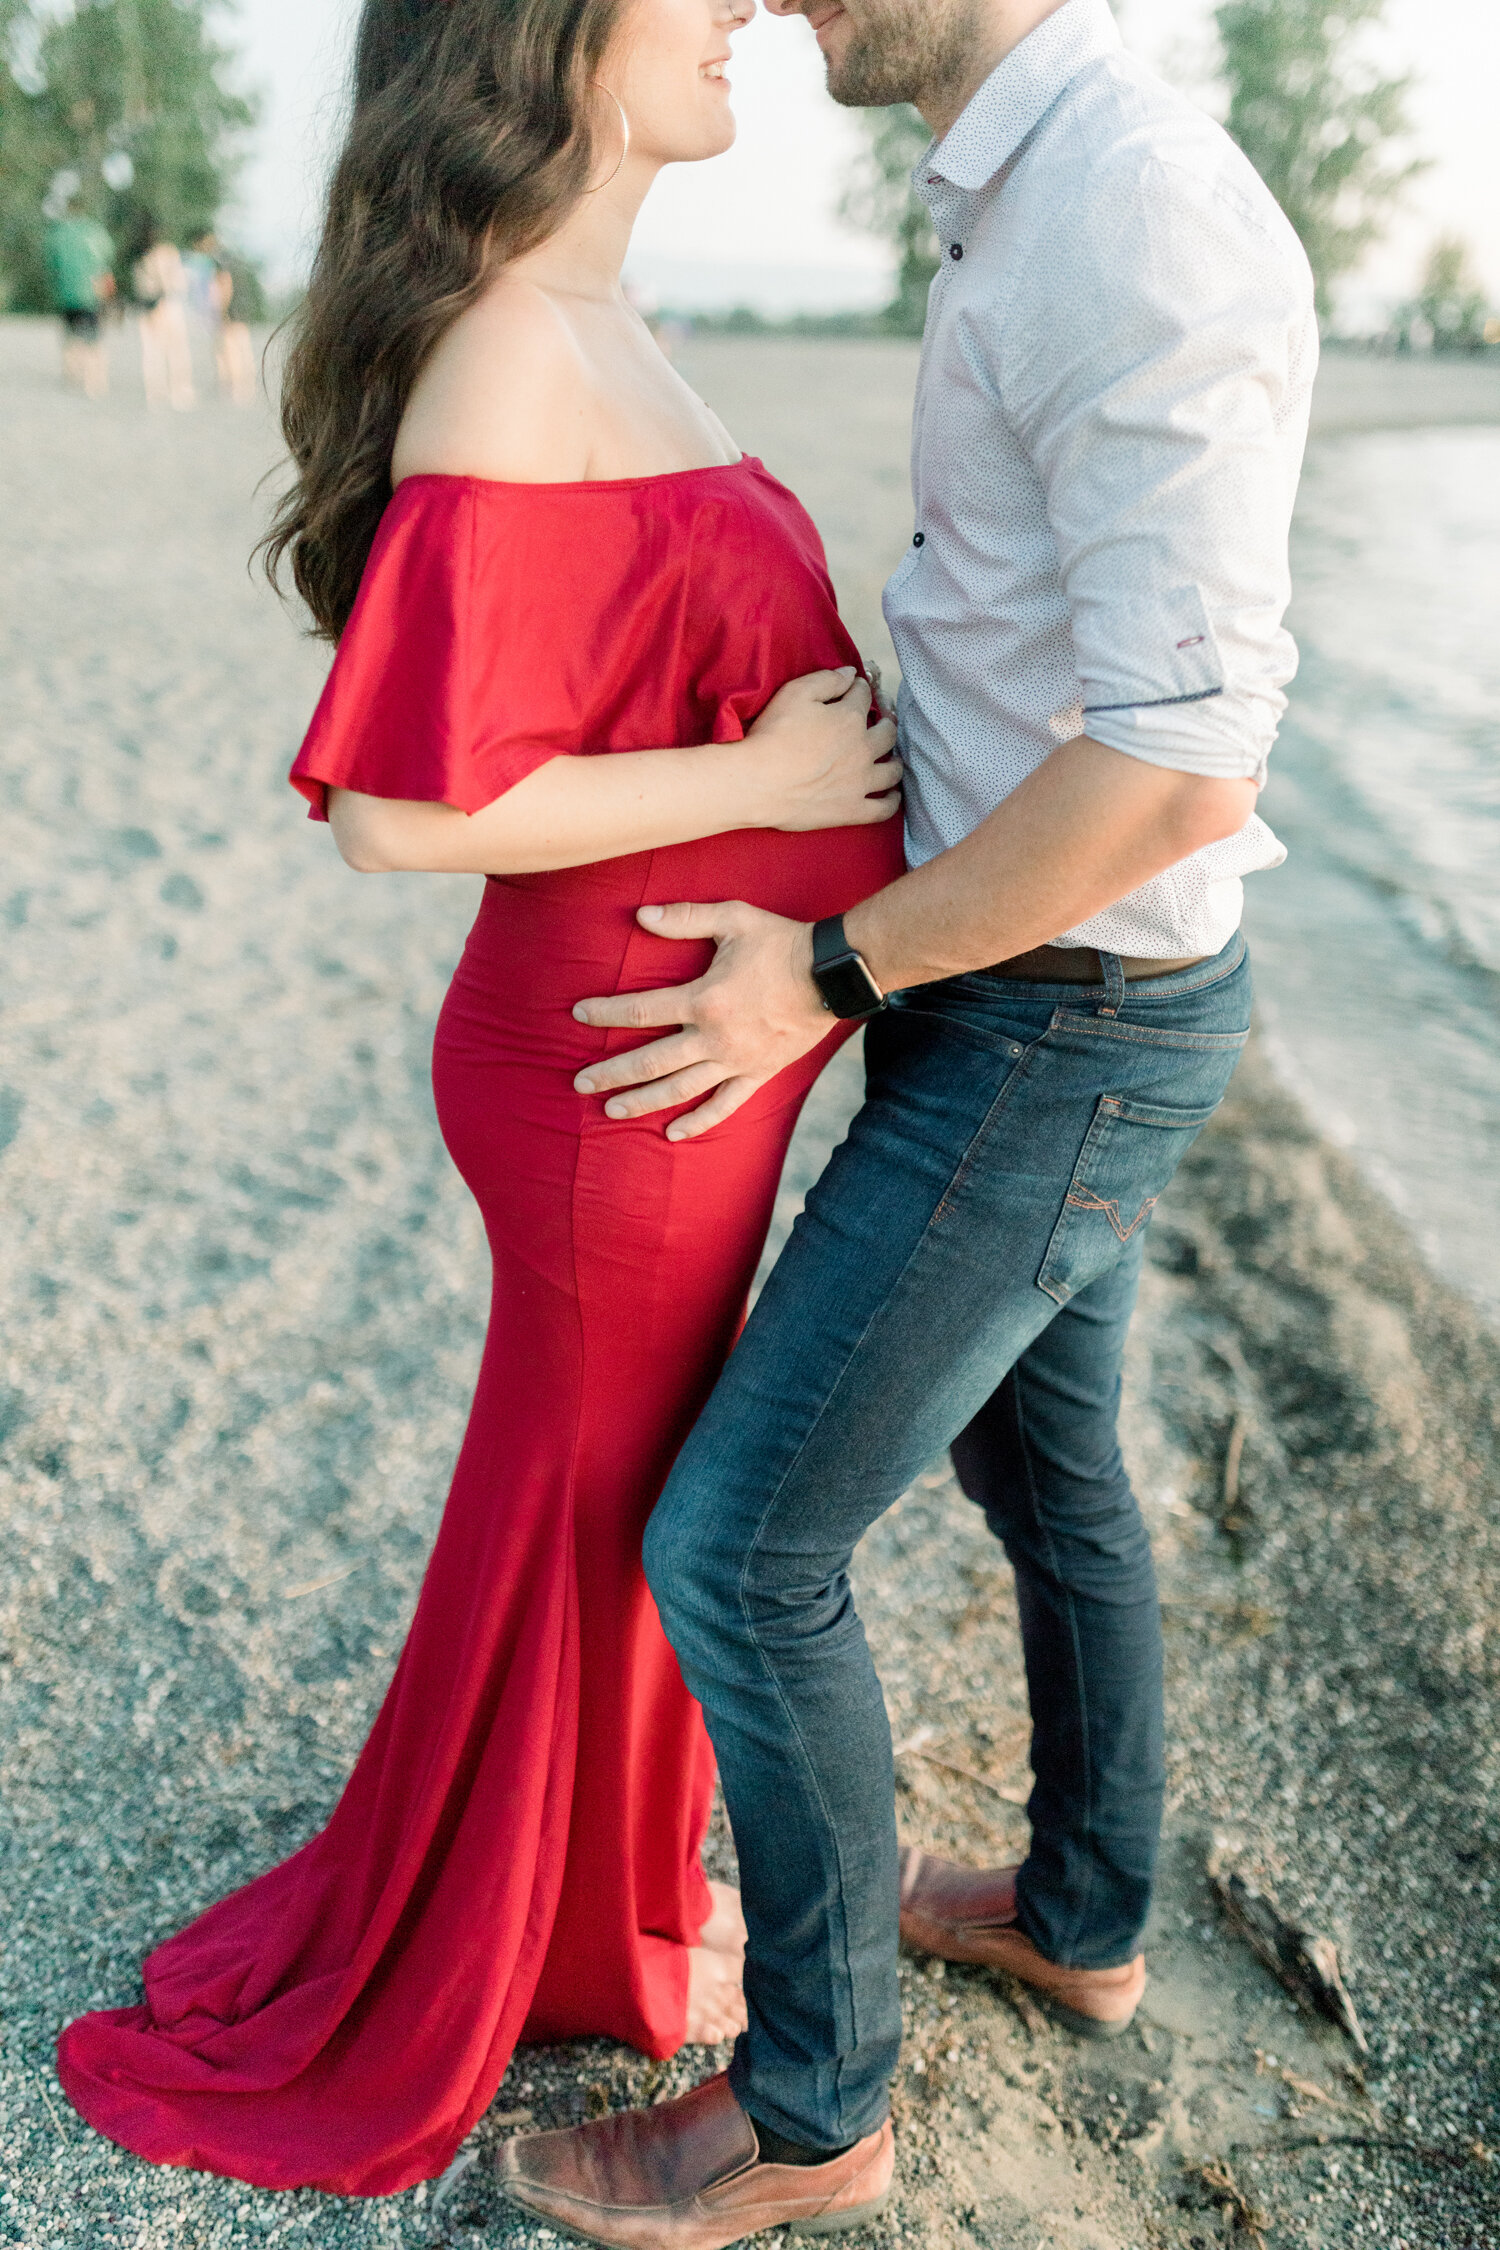  While standing along the shoreline of Brittania Beach in Ontario, Canada, Chelsea Mason Photography captures this expectant couple embrace one another. brittania beach, ontario photographer, maternity beach photos, red off the shoulder maternity dre